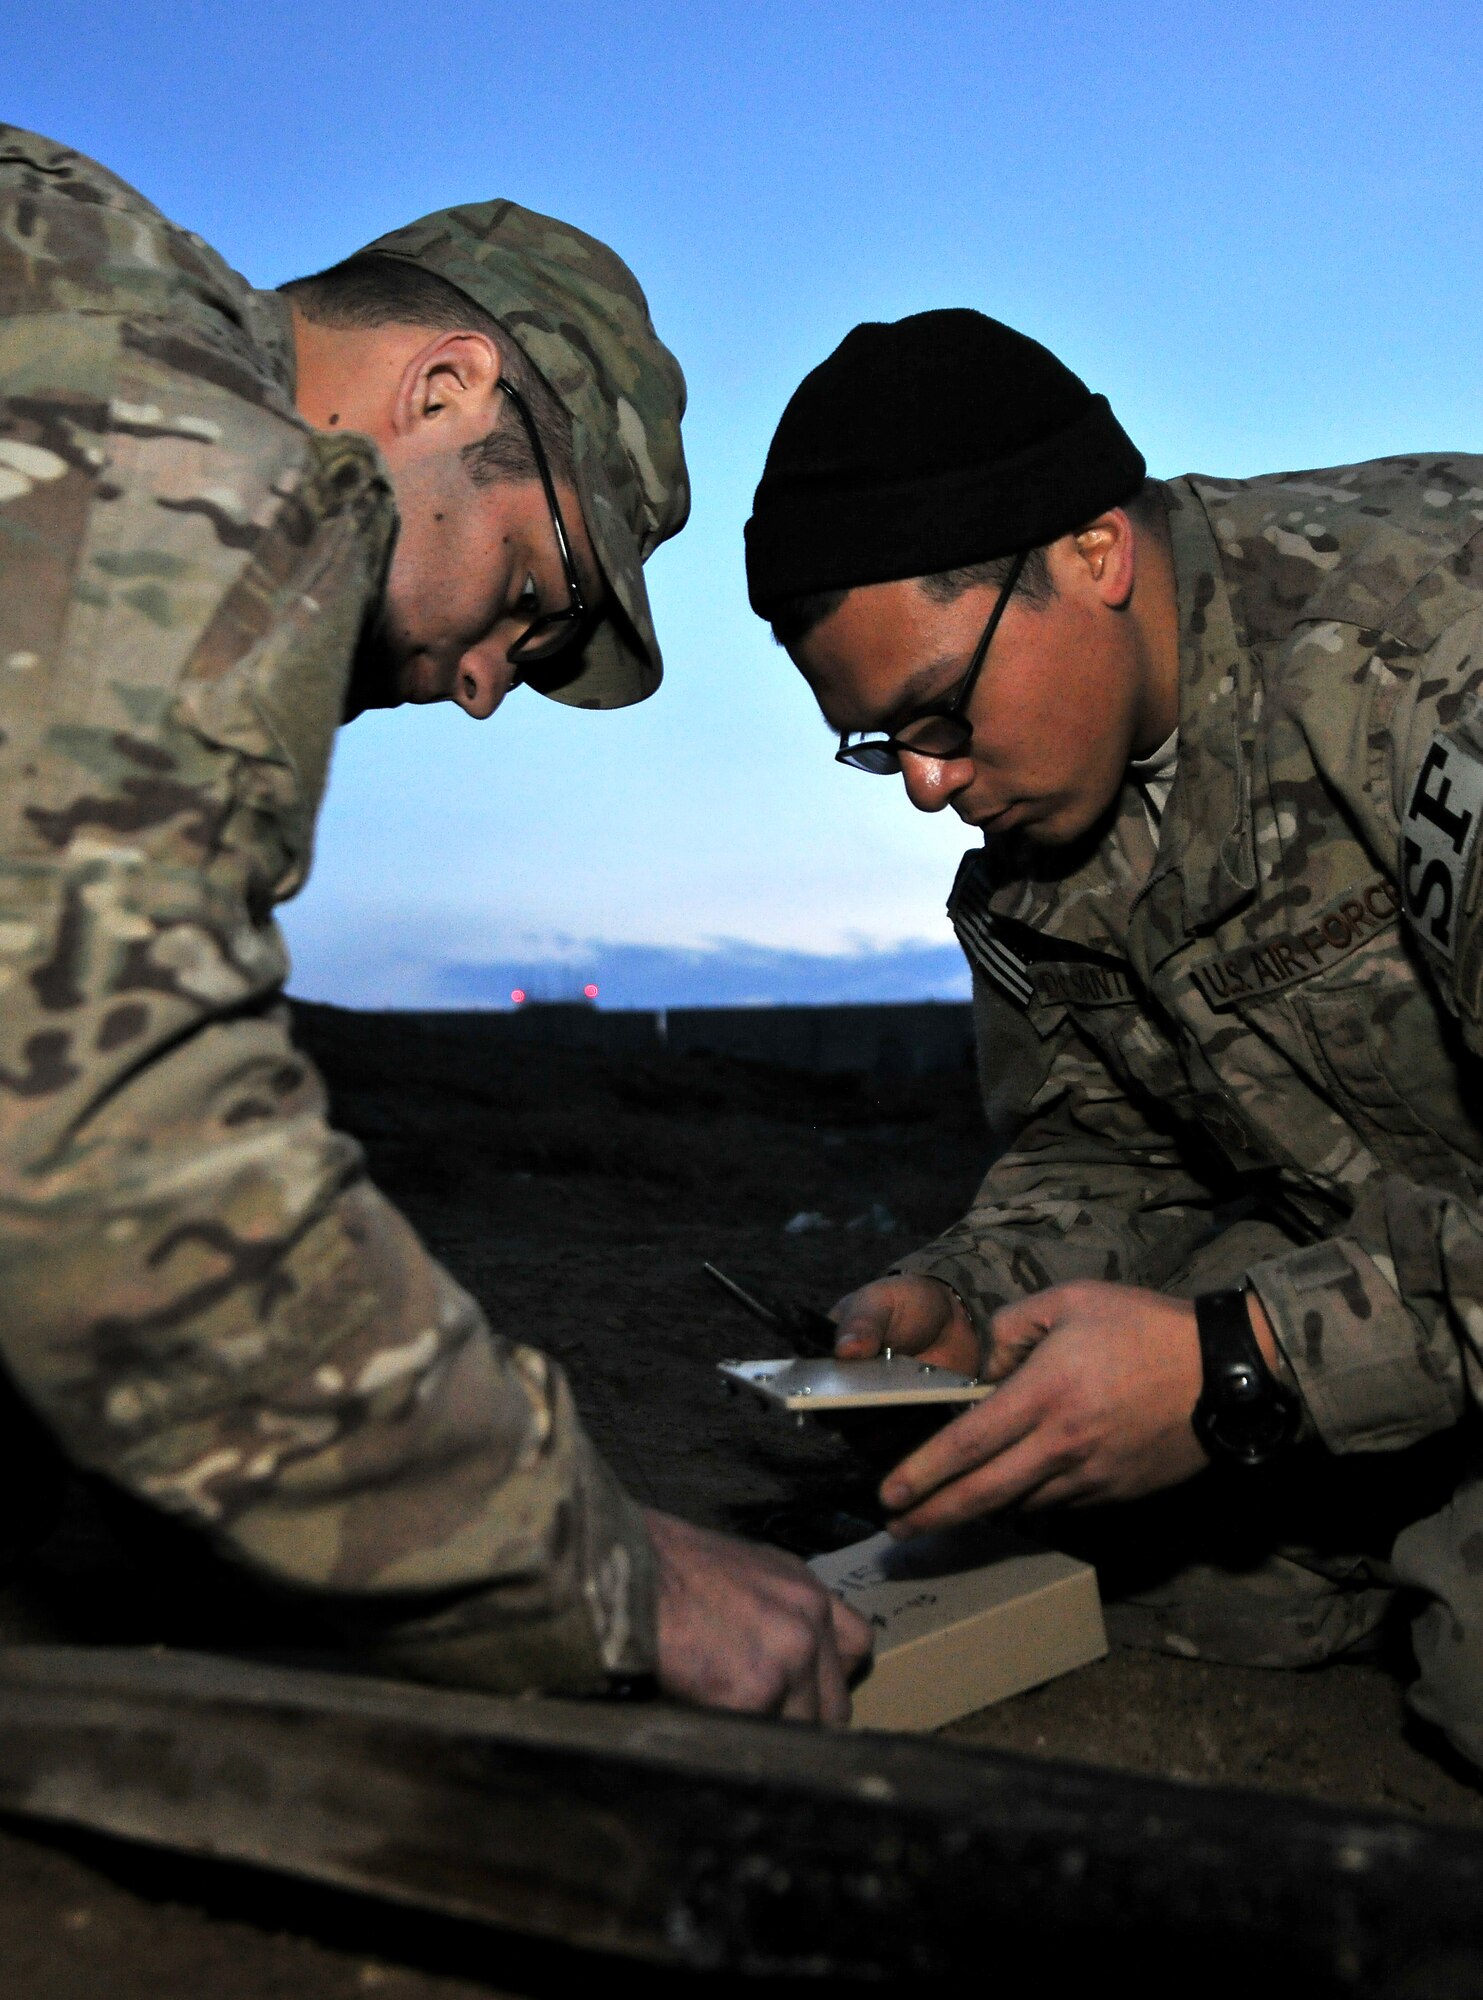 Tech. Sgt. John Dolbee and Staff Sgt. Ben DeSantiago, 755th Expeditionary Security Forces Squadron Reaper team trackers, connect a power source to a ground sensor for an enemy movement and detection training scenario at Bagram Airfield, Afghanistan, Feb. 14, 2013. The team uses a series of search techniques from simple eyes-on to ground sensors to track insurgent activity and provide site exploitation after an attack. (U.S. Air Force photo/Senior Airman Chris Willis)